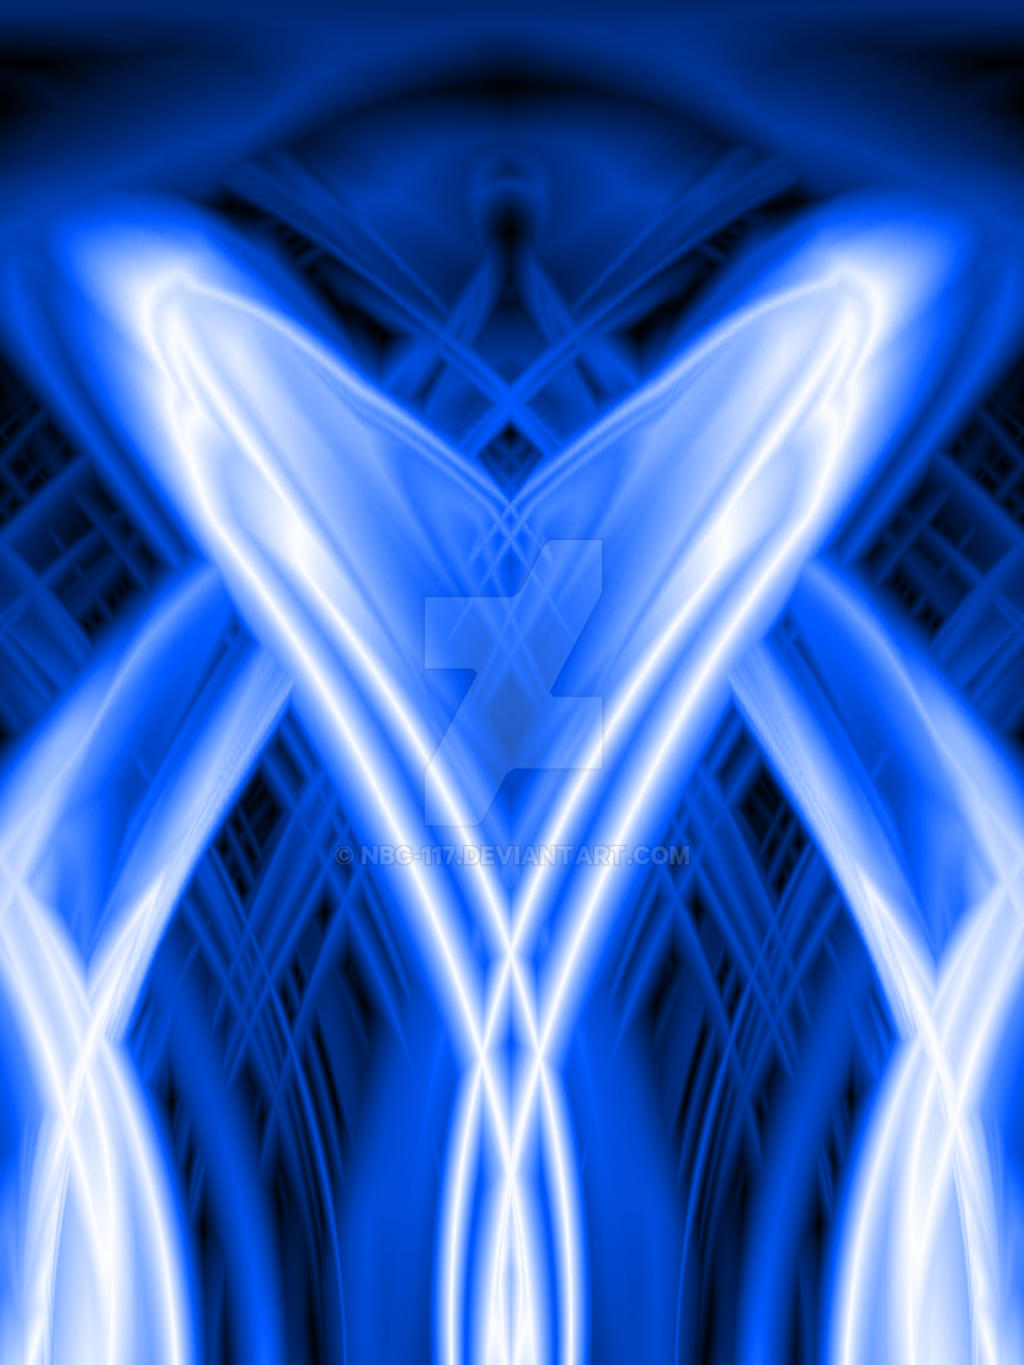 Blue Abstract art by NBC-117 on DeviantArt